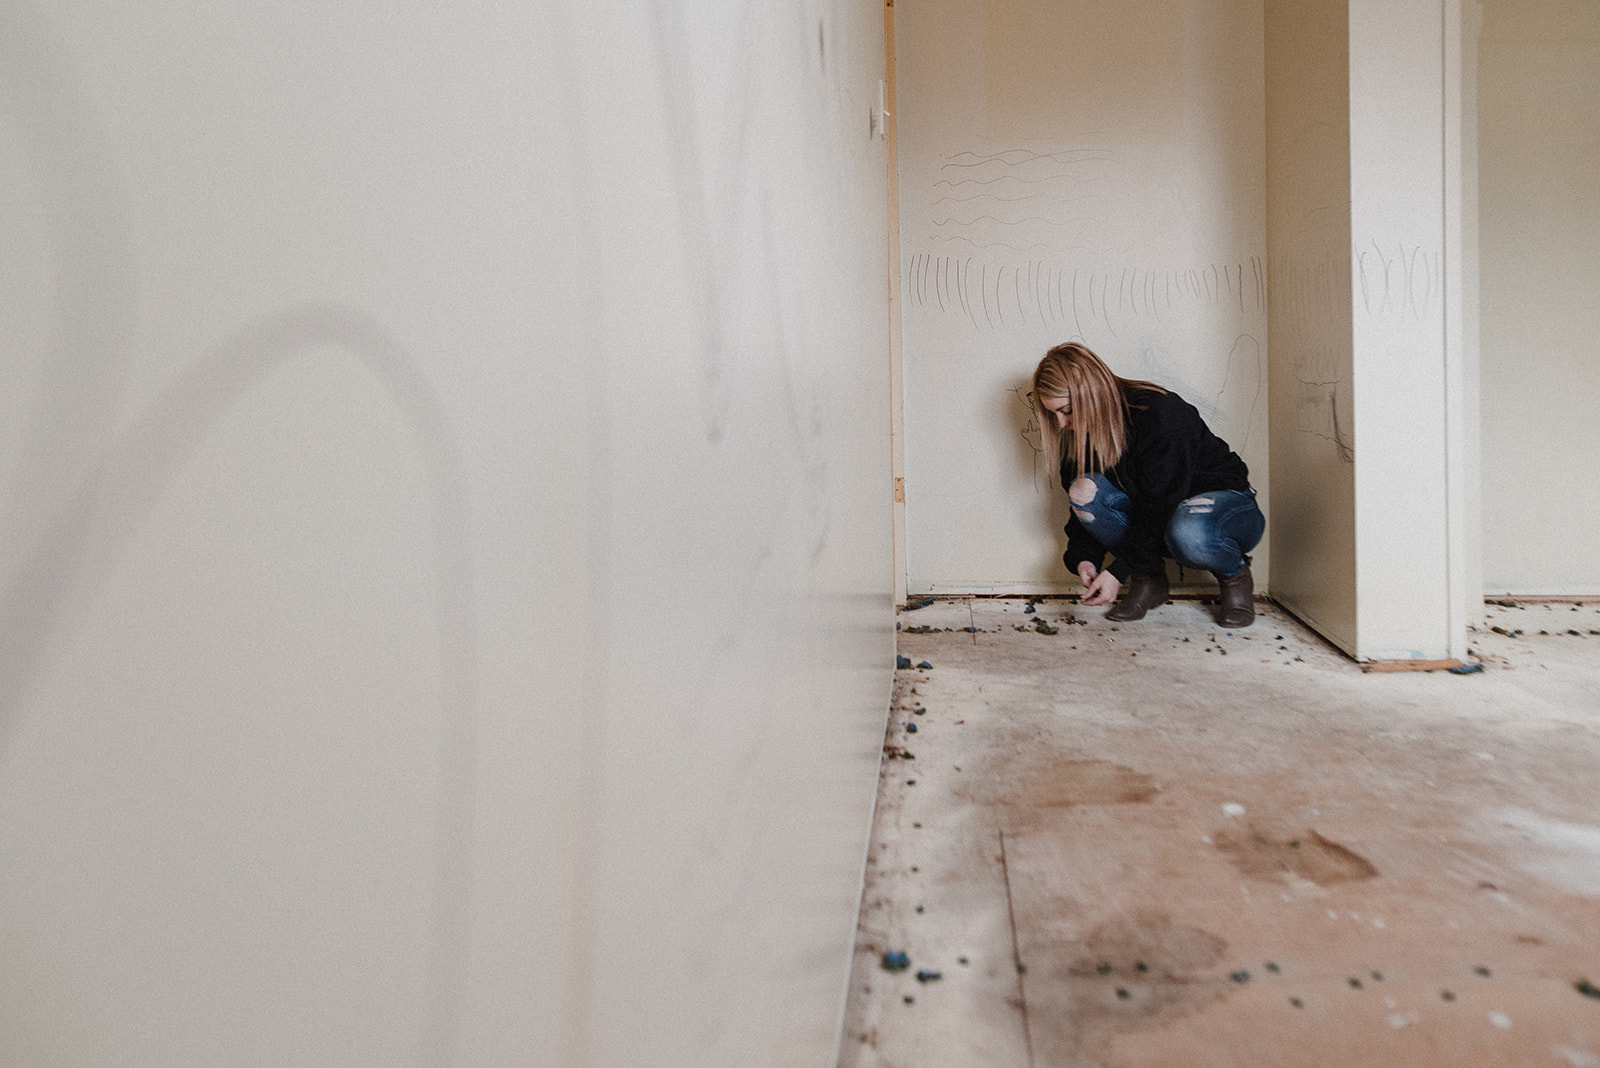 A woman wearing blue jeans and a black sweater kneels to work on renovations in a Kamloops home.